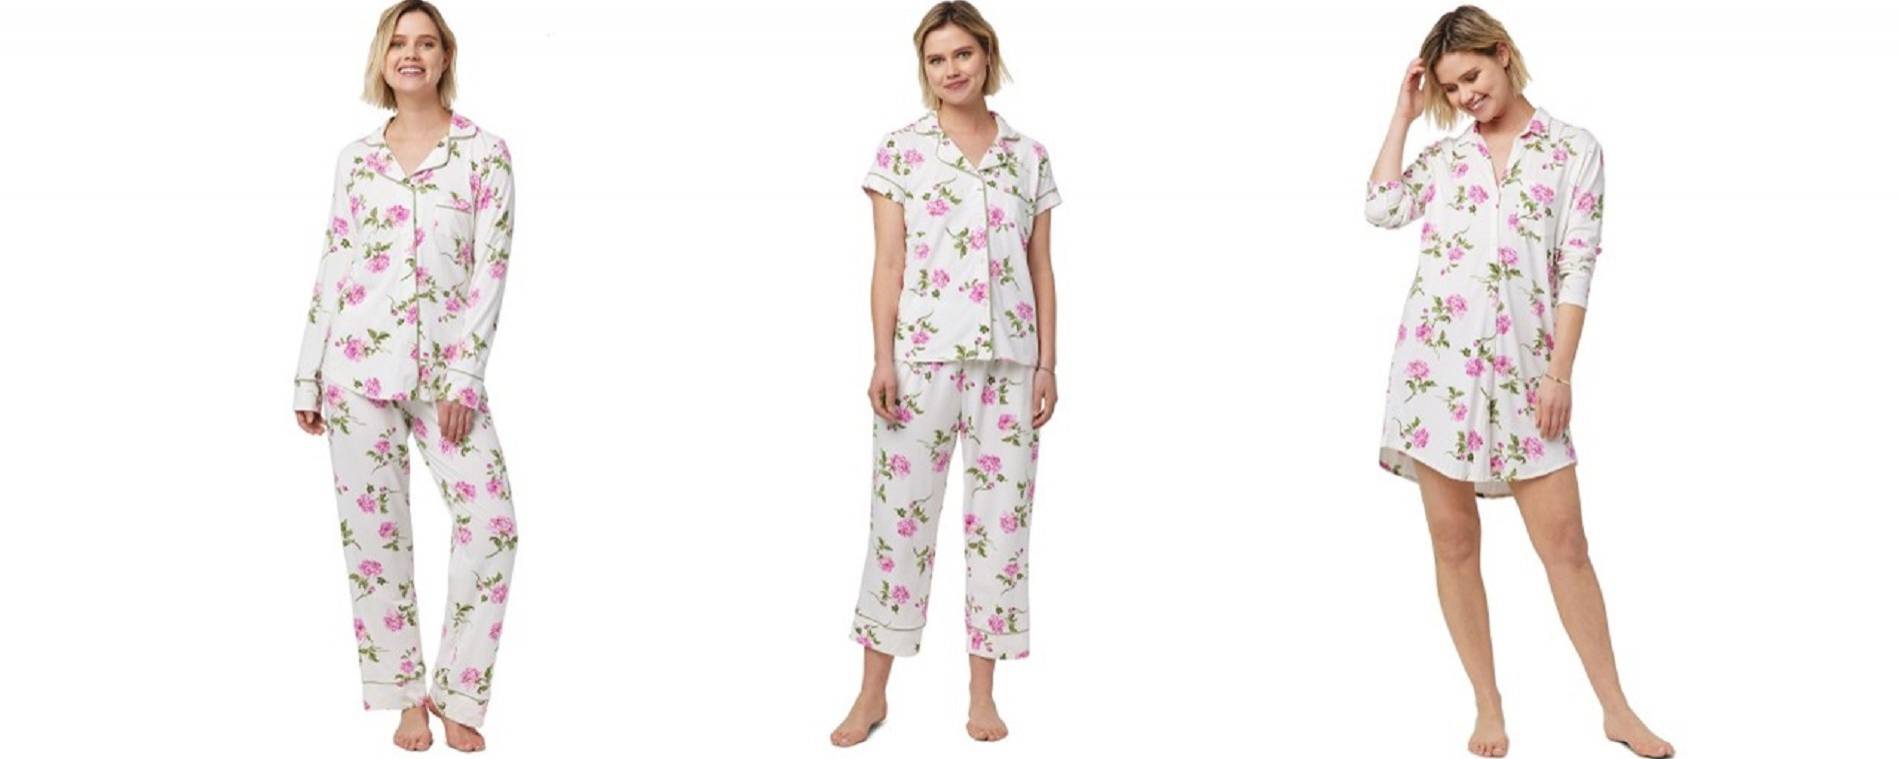 https://store.greenbrier.com/the-greenbrier-bath-collection/sleepwear-robes?product_list_limit=36